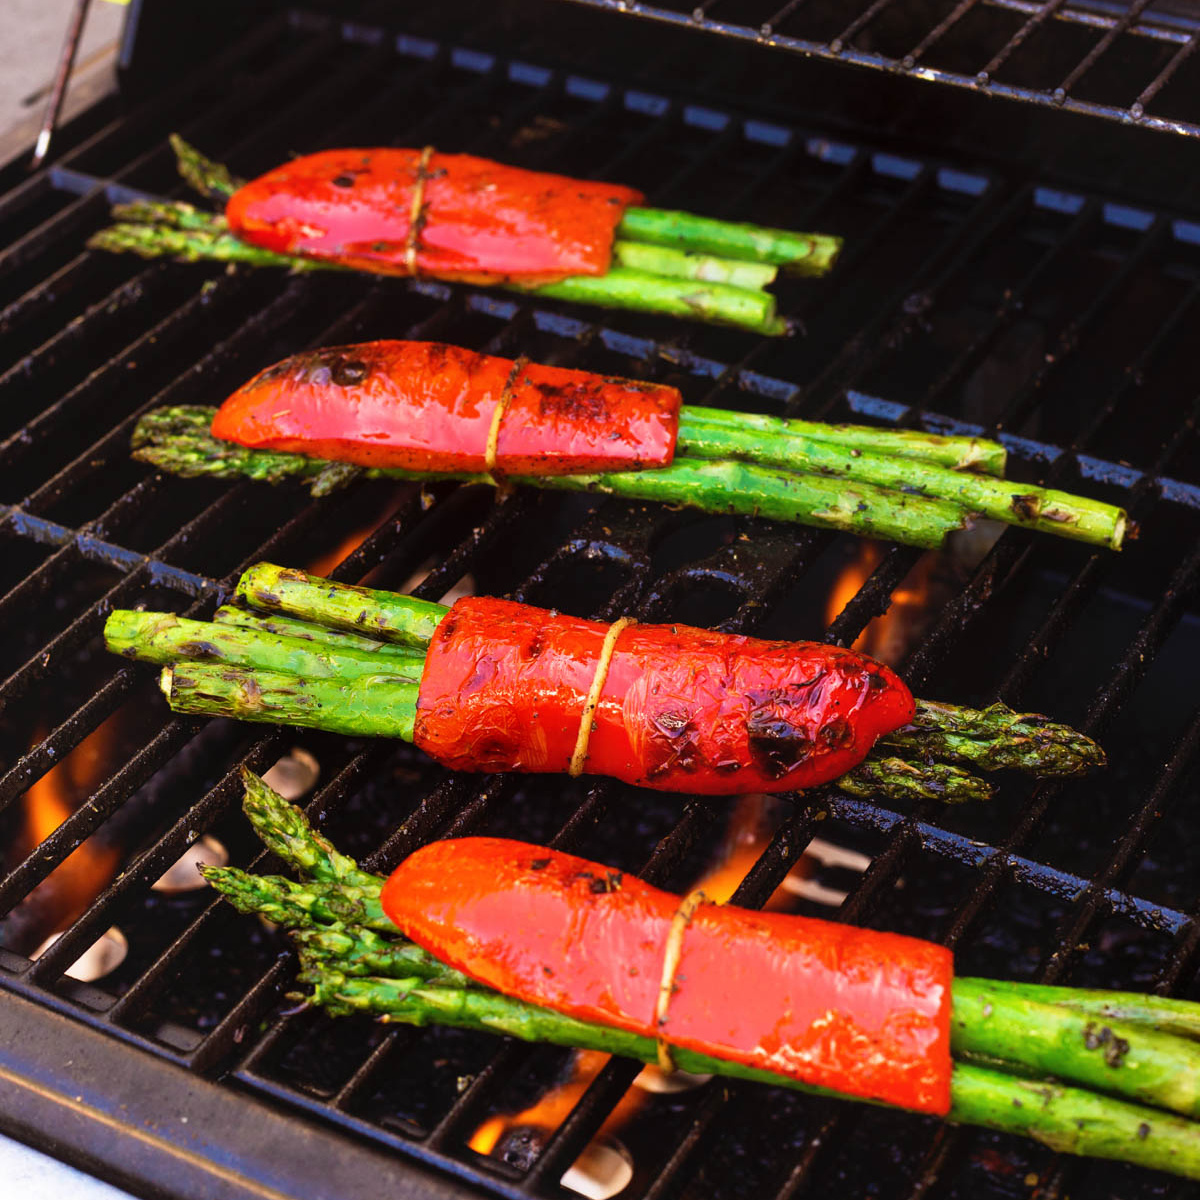 Bundles of asparagus and red pepper on the grill